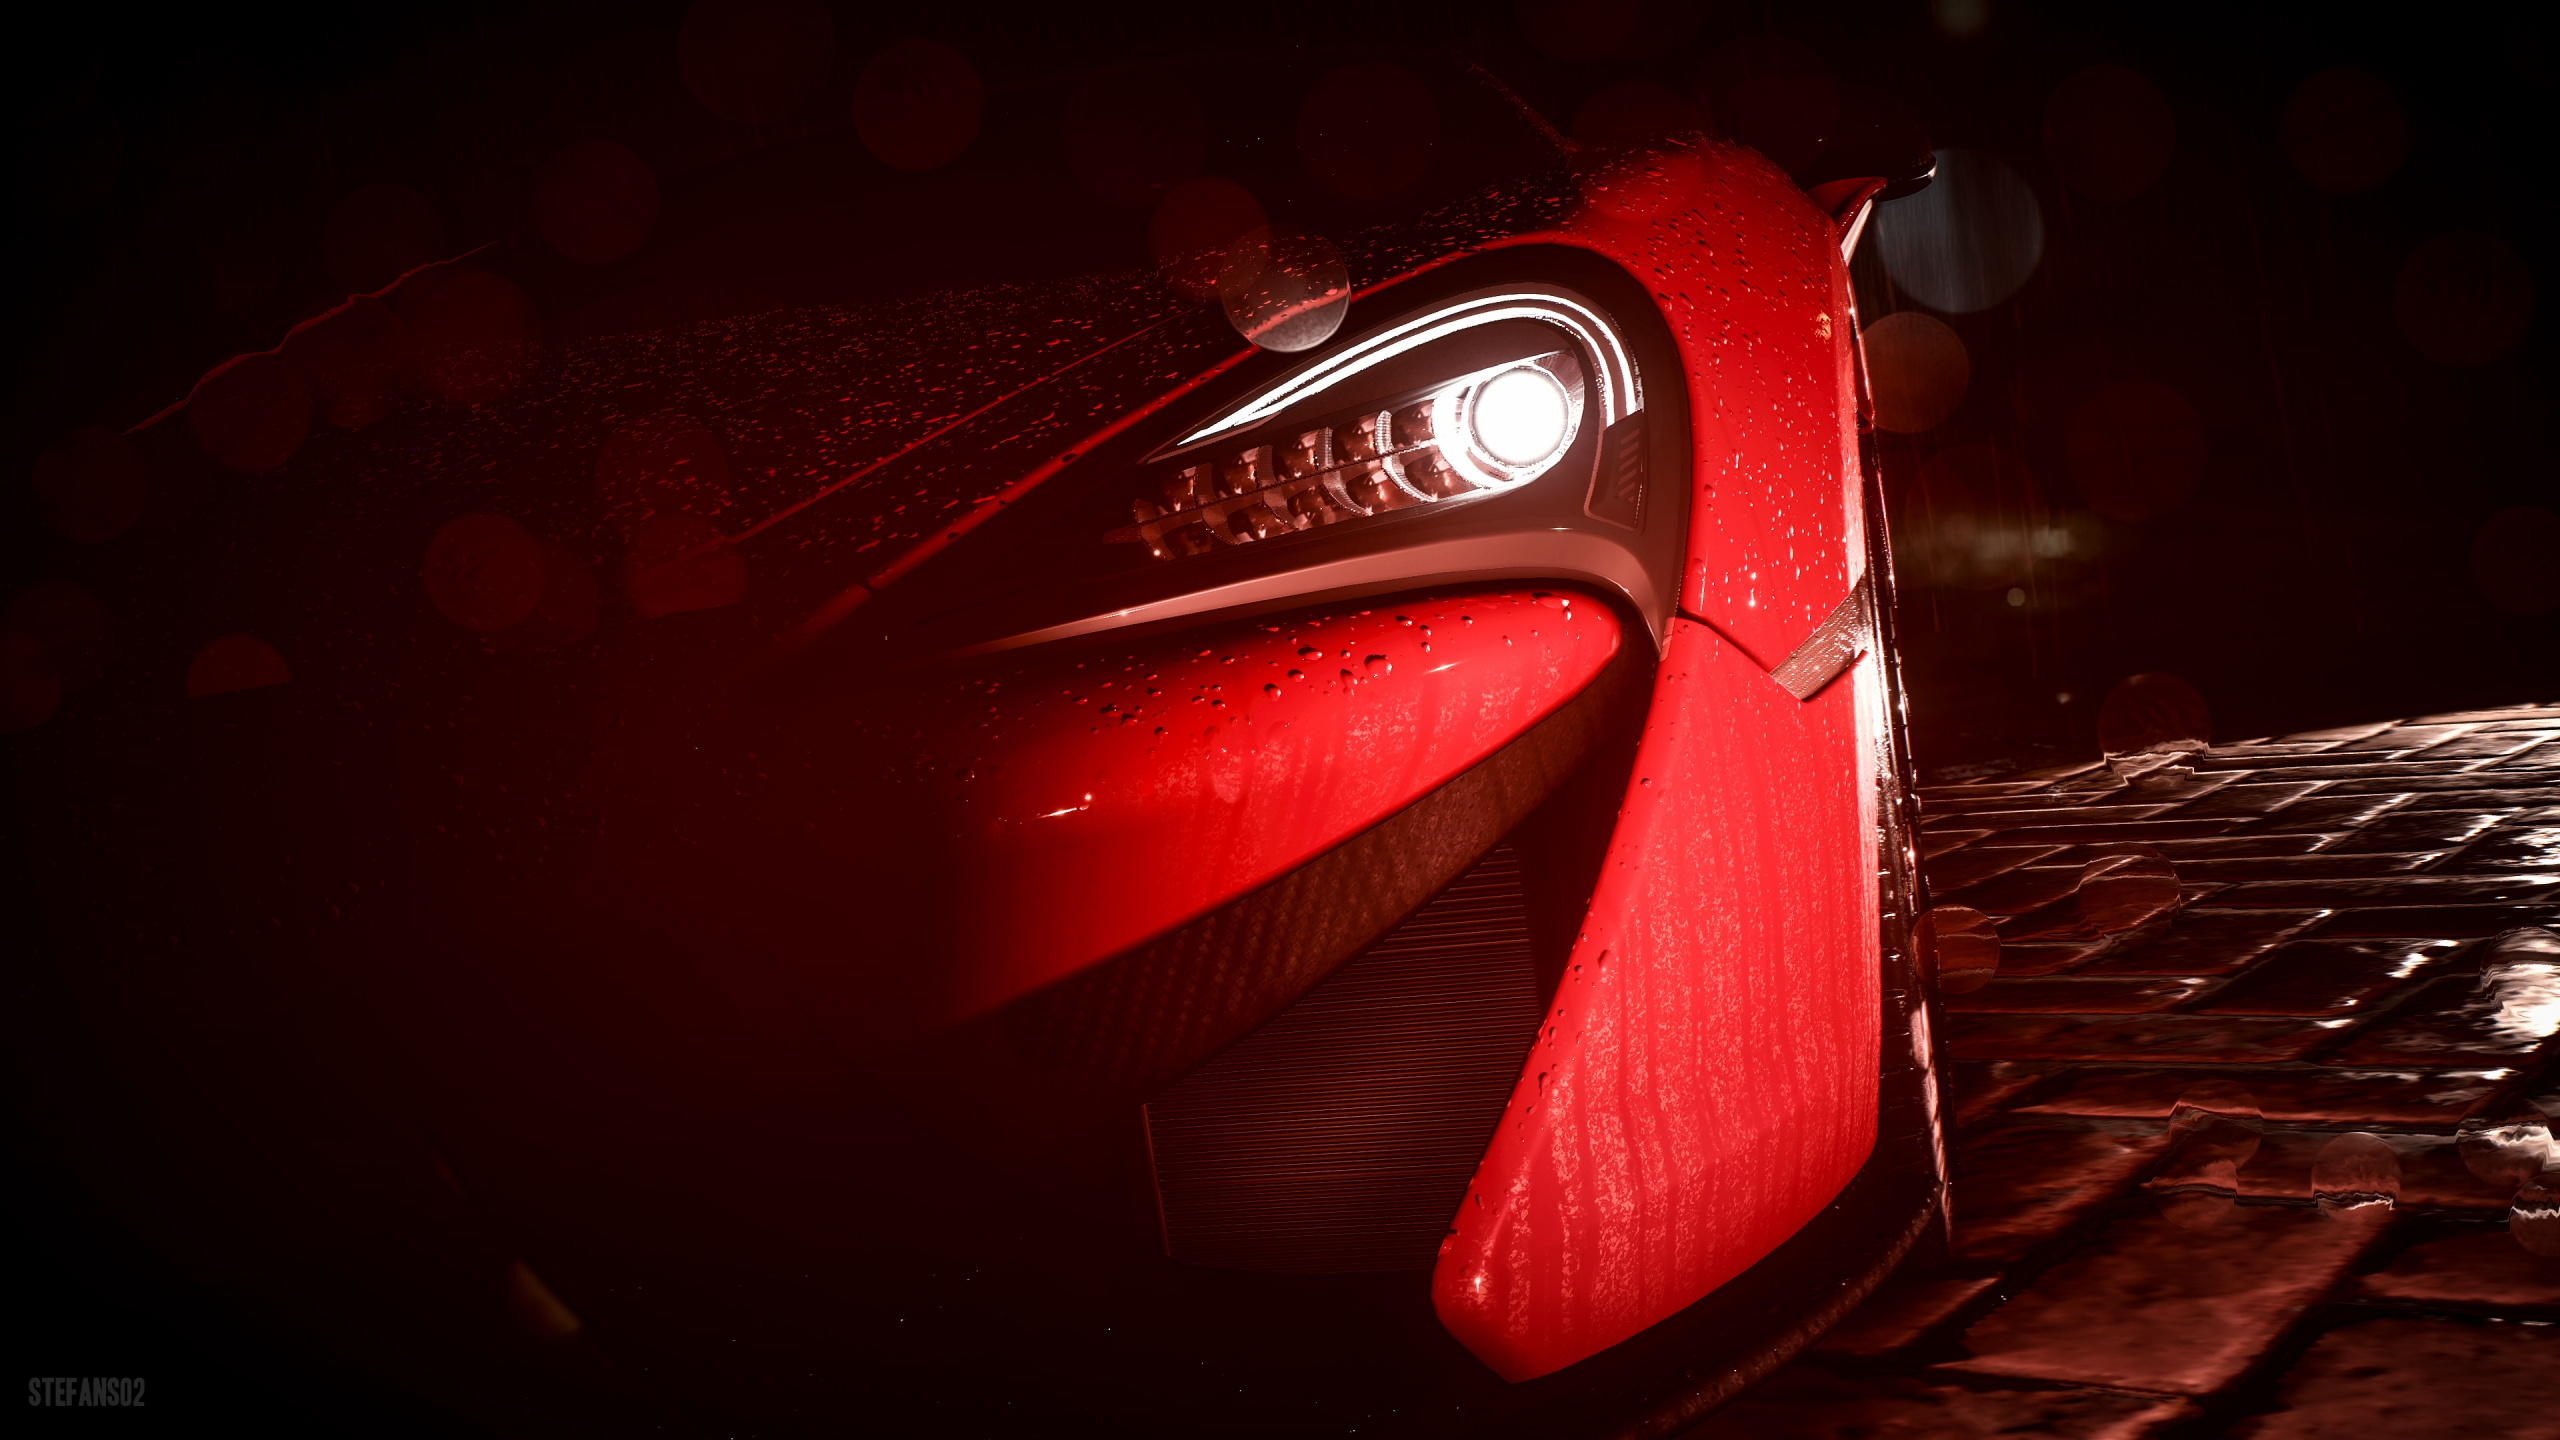 Red and Silver Car in a Dark Room. Wallpaper in 2560x1440 Resolution